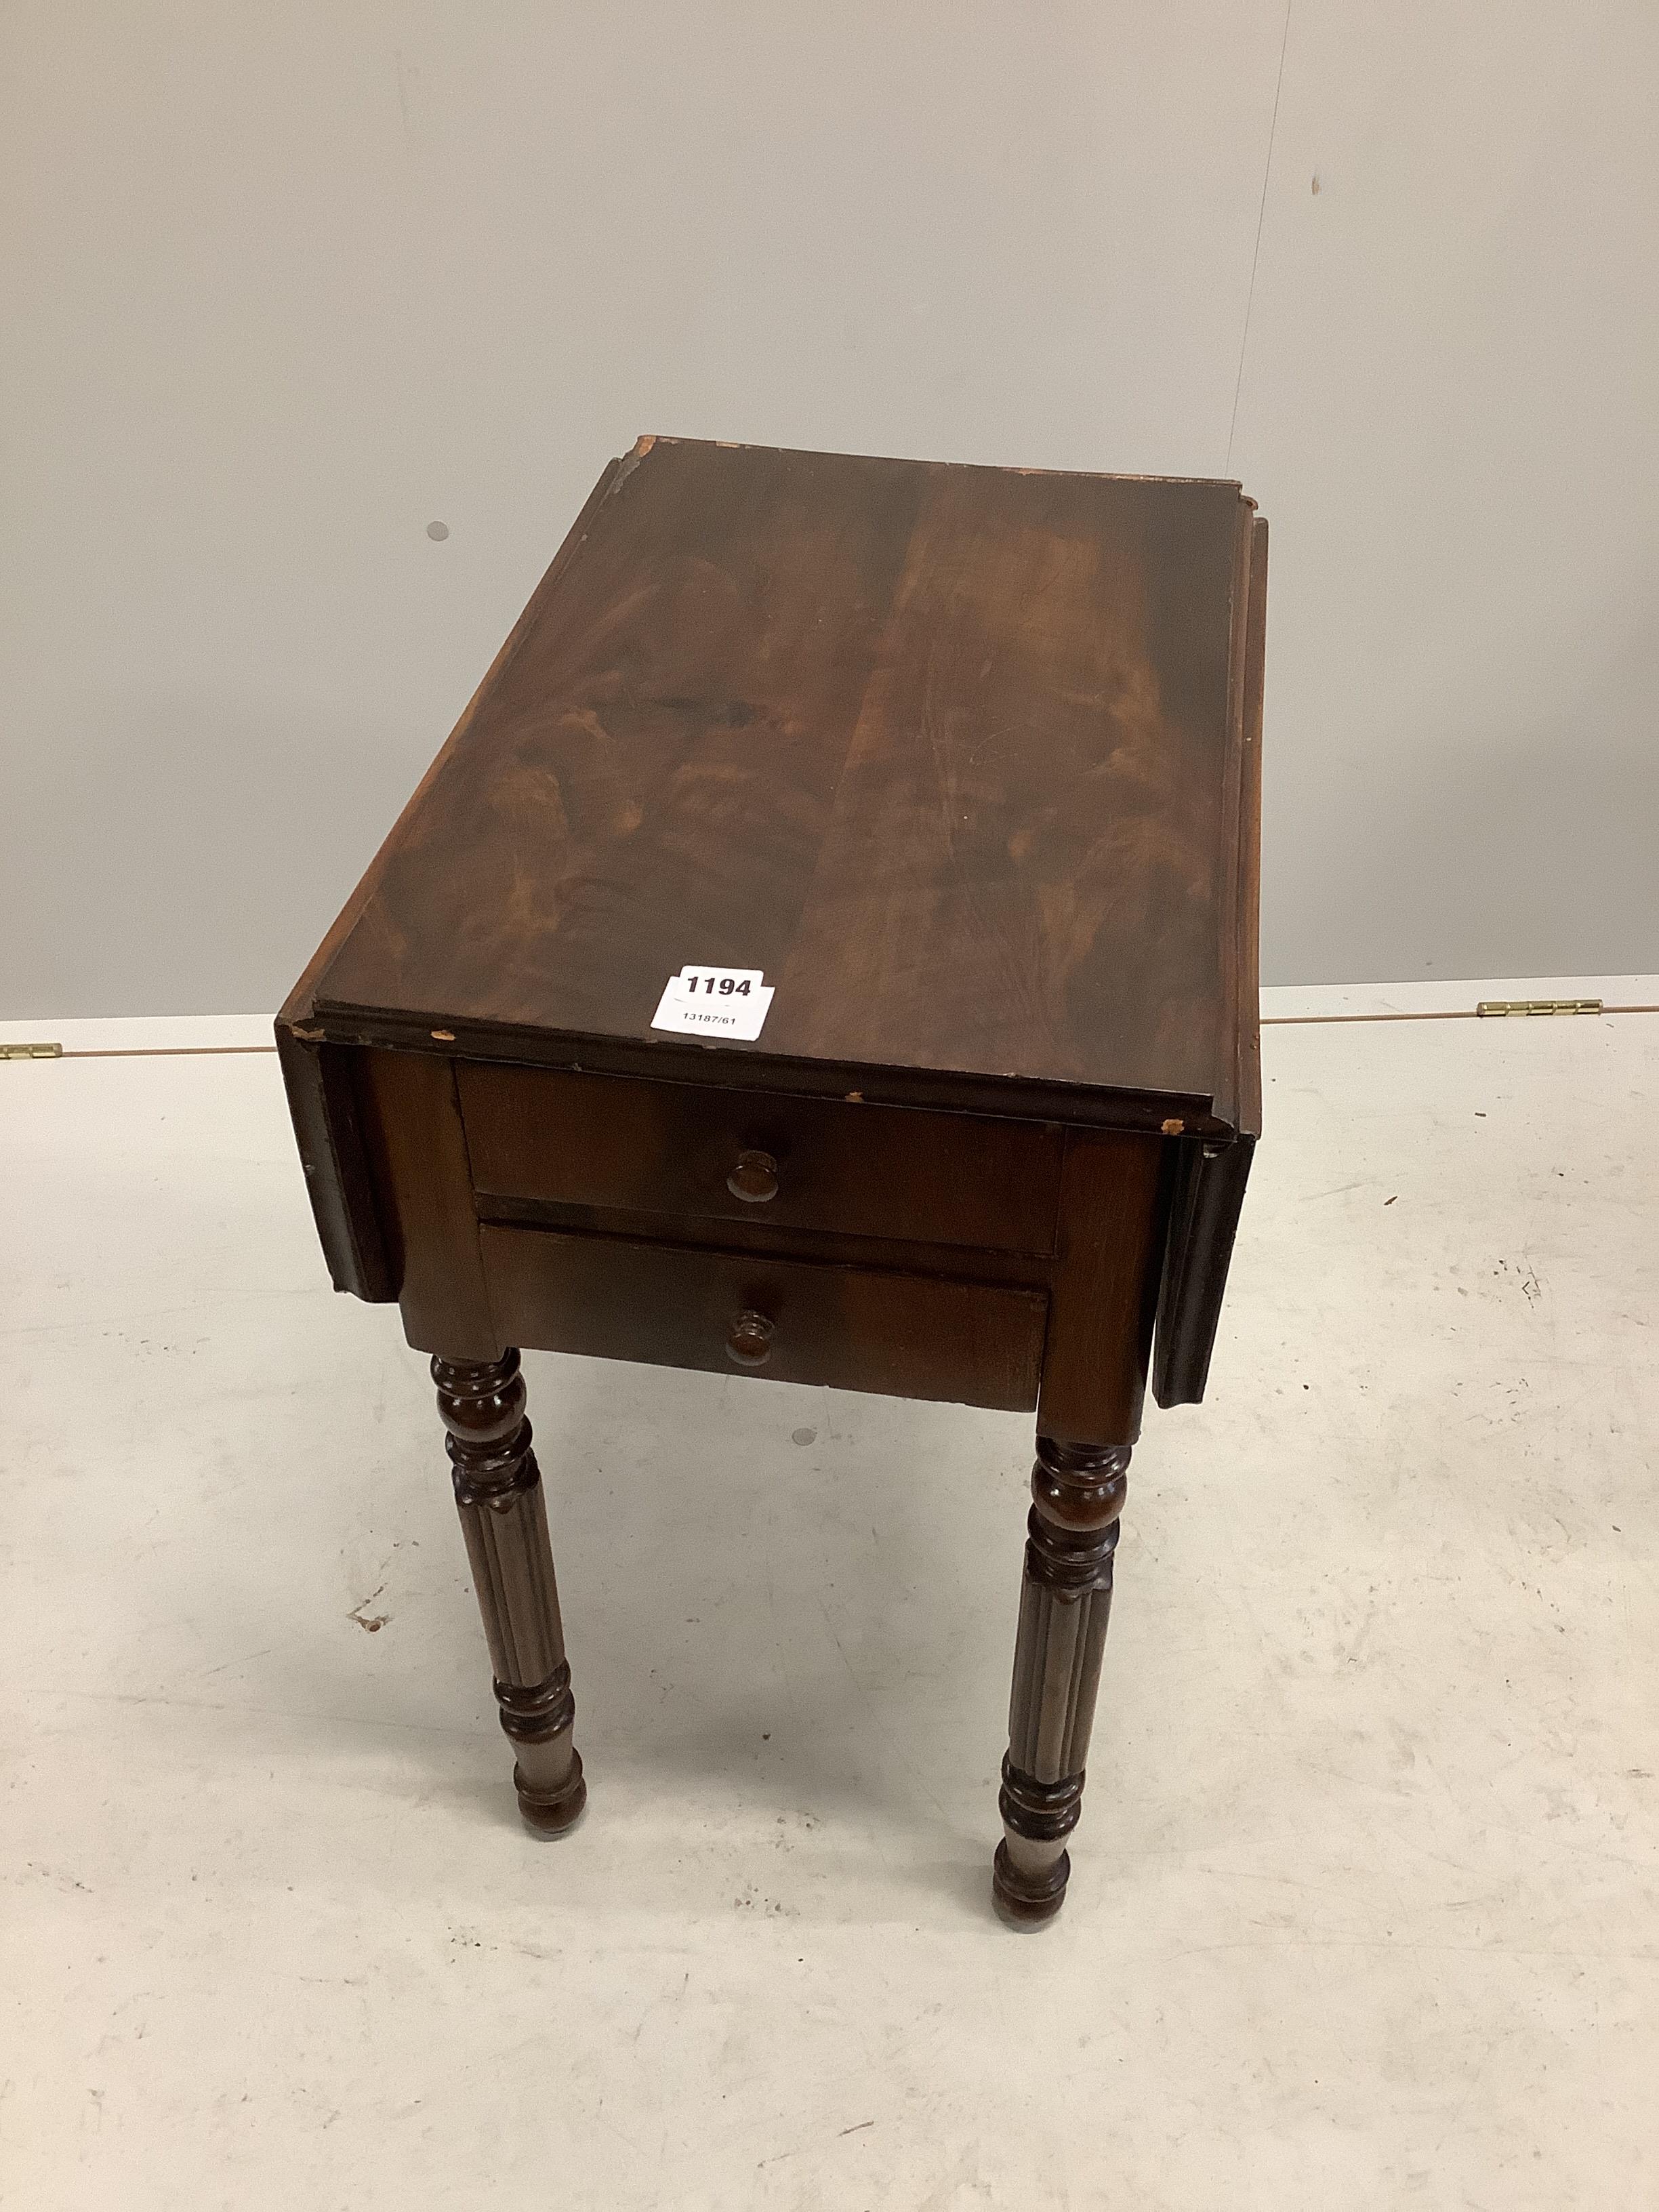 A 19th century French mahogany work table, width 37cm, depth 52cm, height 65cm